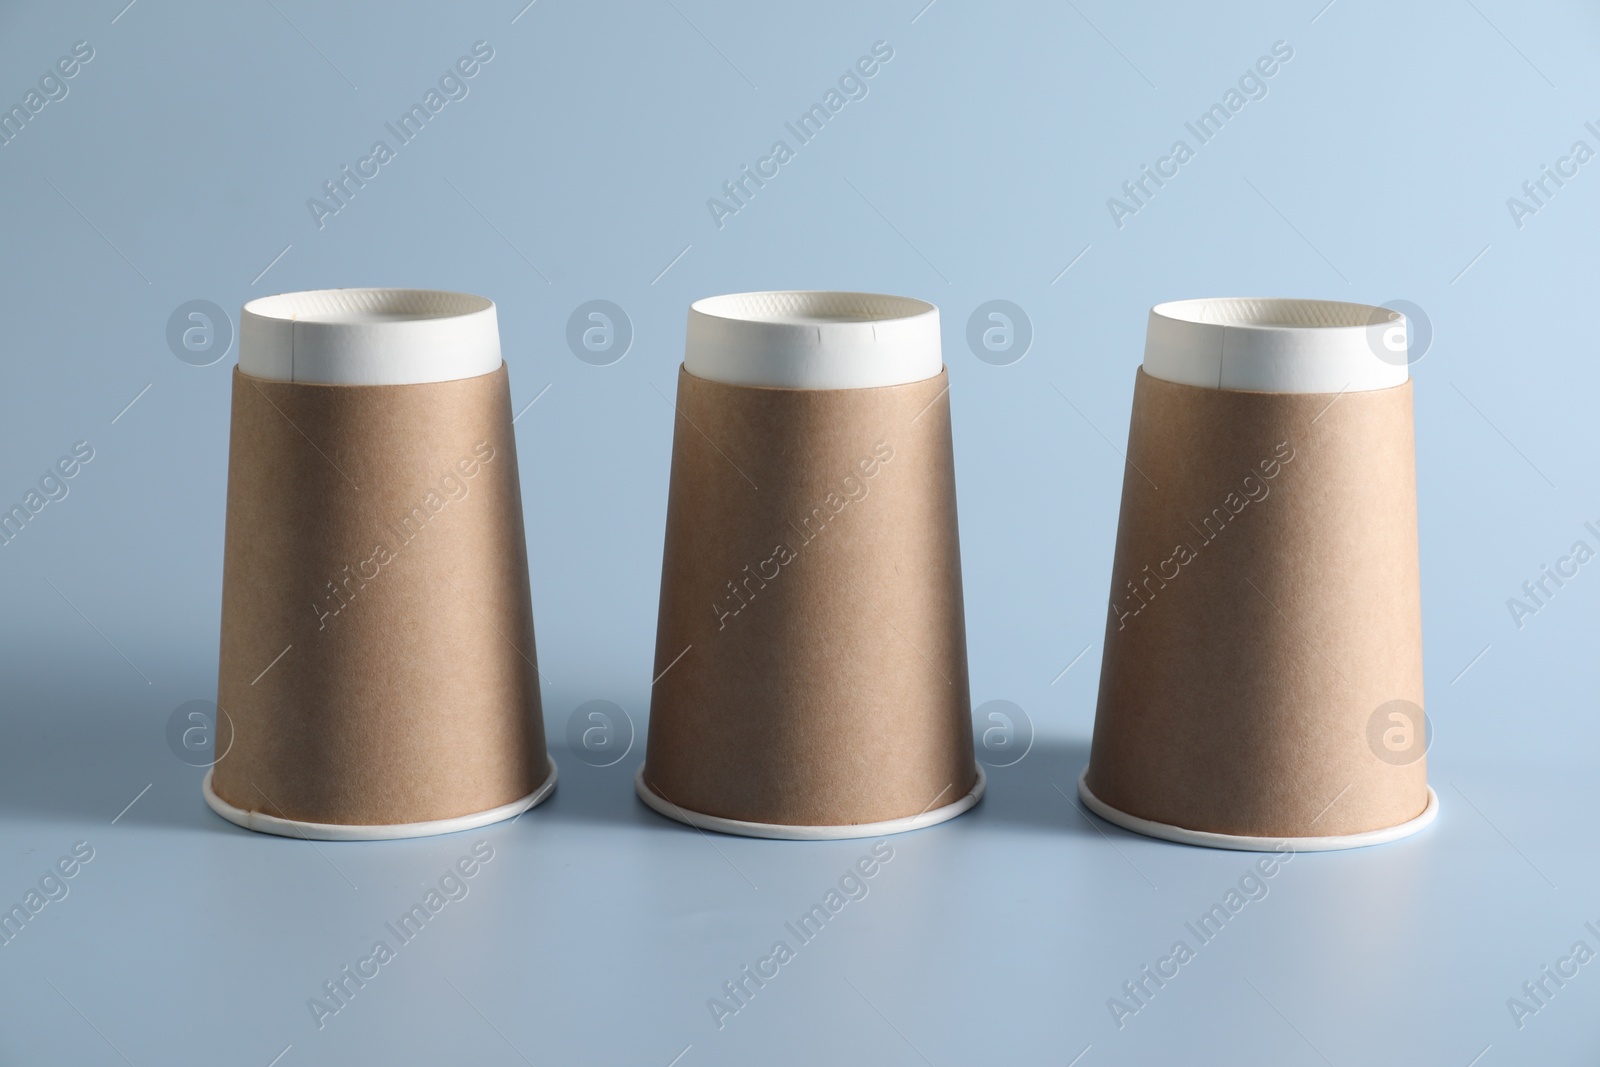 Photo of Shell game. Three paper cups on light blue background